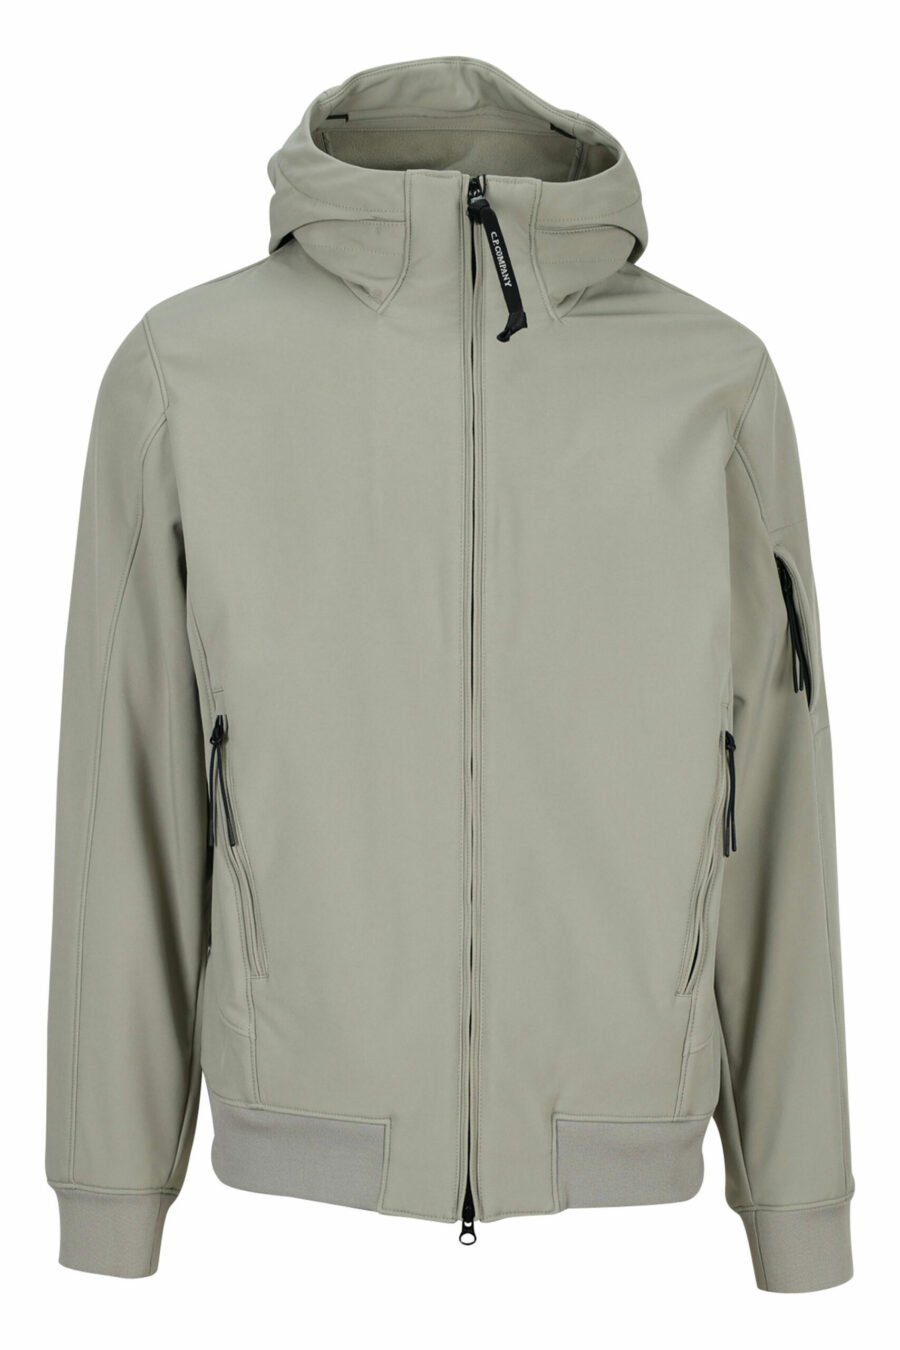 Beige jacket with hood and logo lens - 7620943543728 scaled